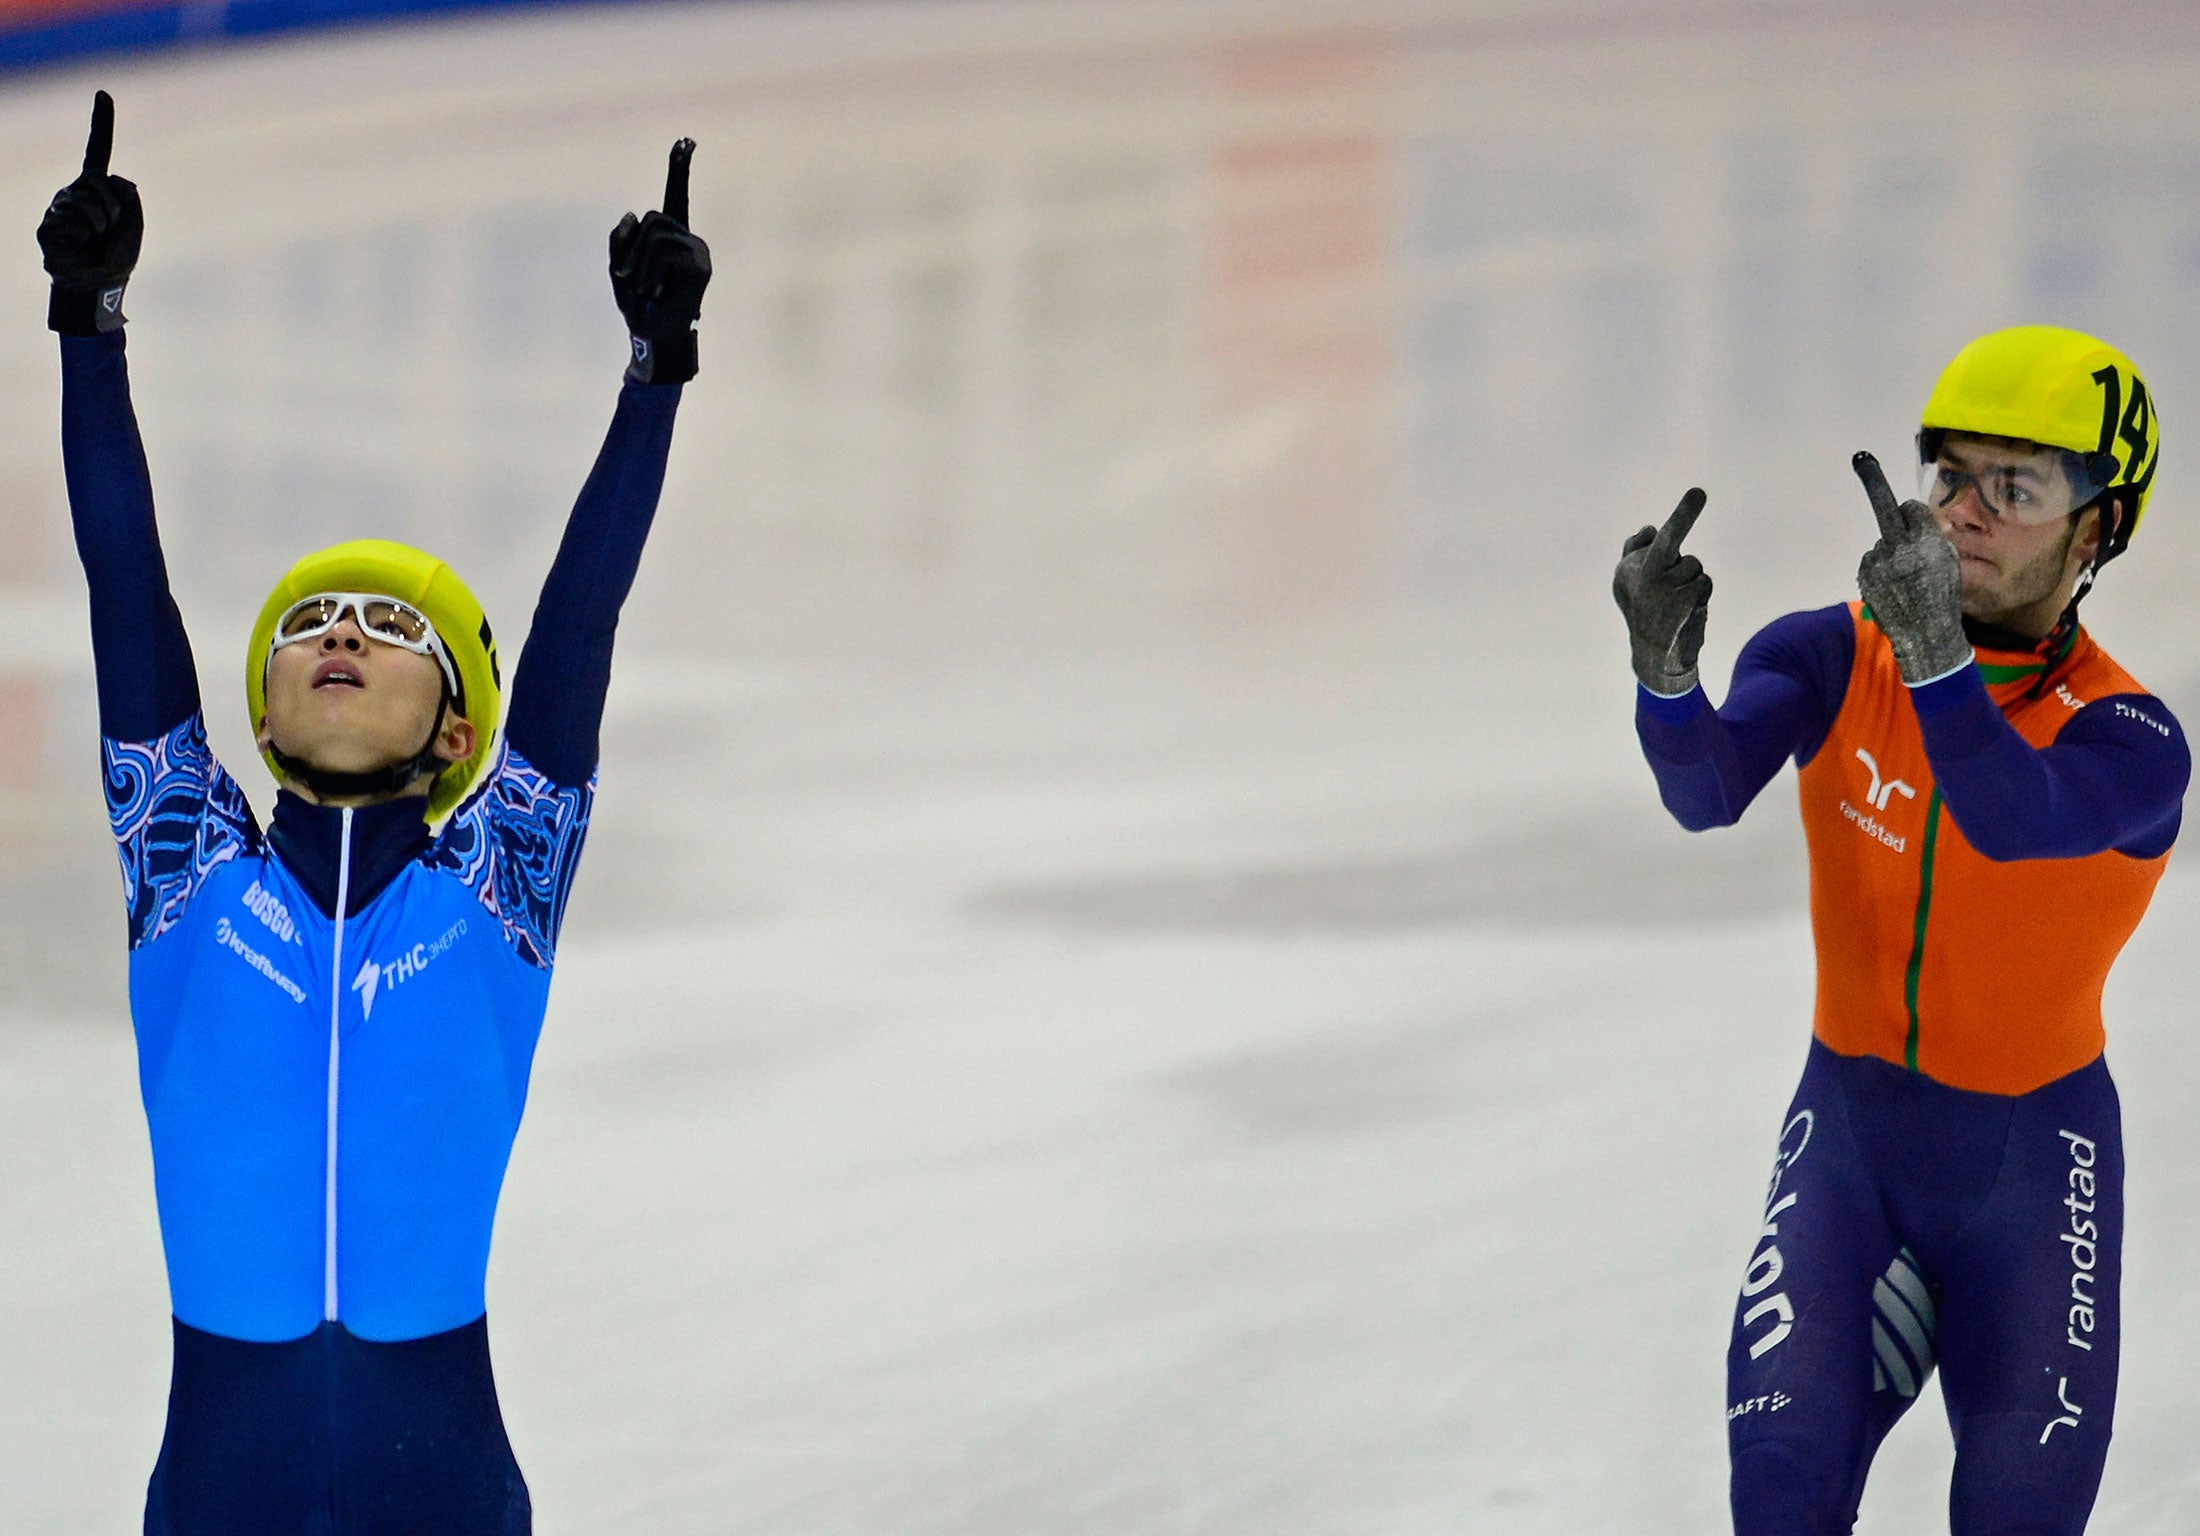 Sjinkie Knegt (R) of the Netherlands' team gestures next to Victor An (L) of the team of Russia celebrating after Russia won the men's 5000m relay final race of the ISU European Short Track speed skating Championships in Dresden, eastern Germany, on Janua